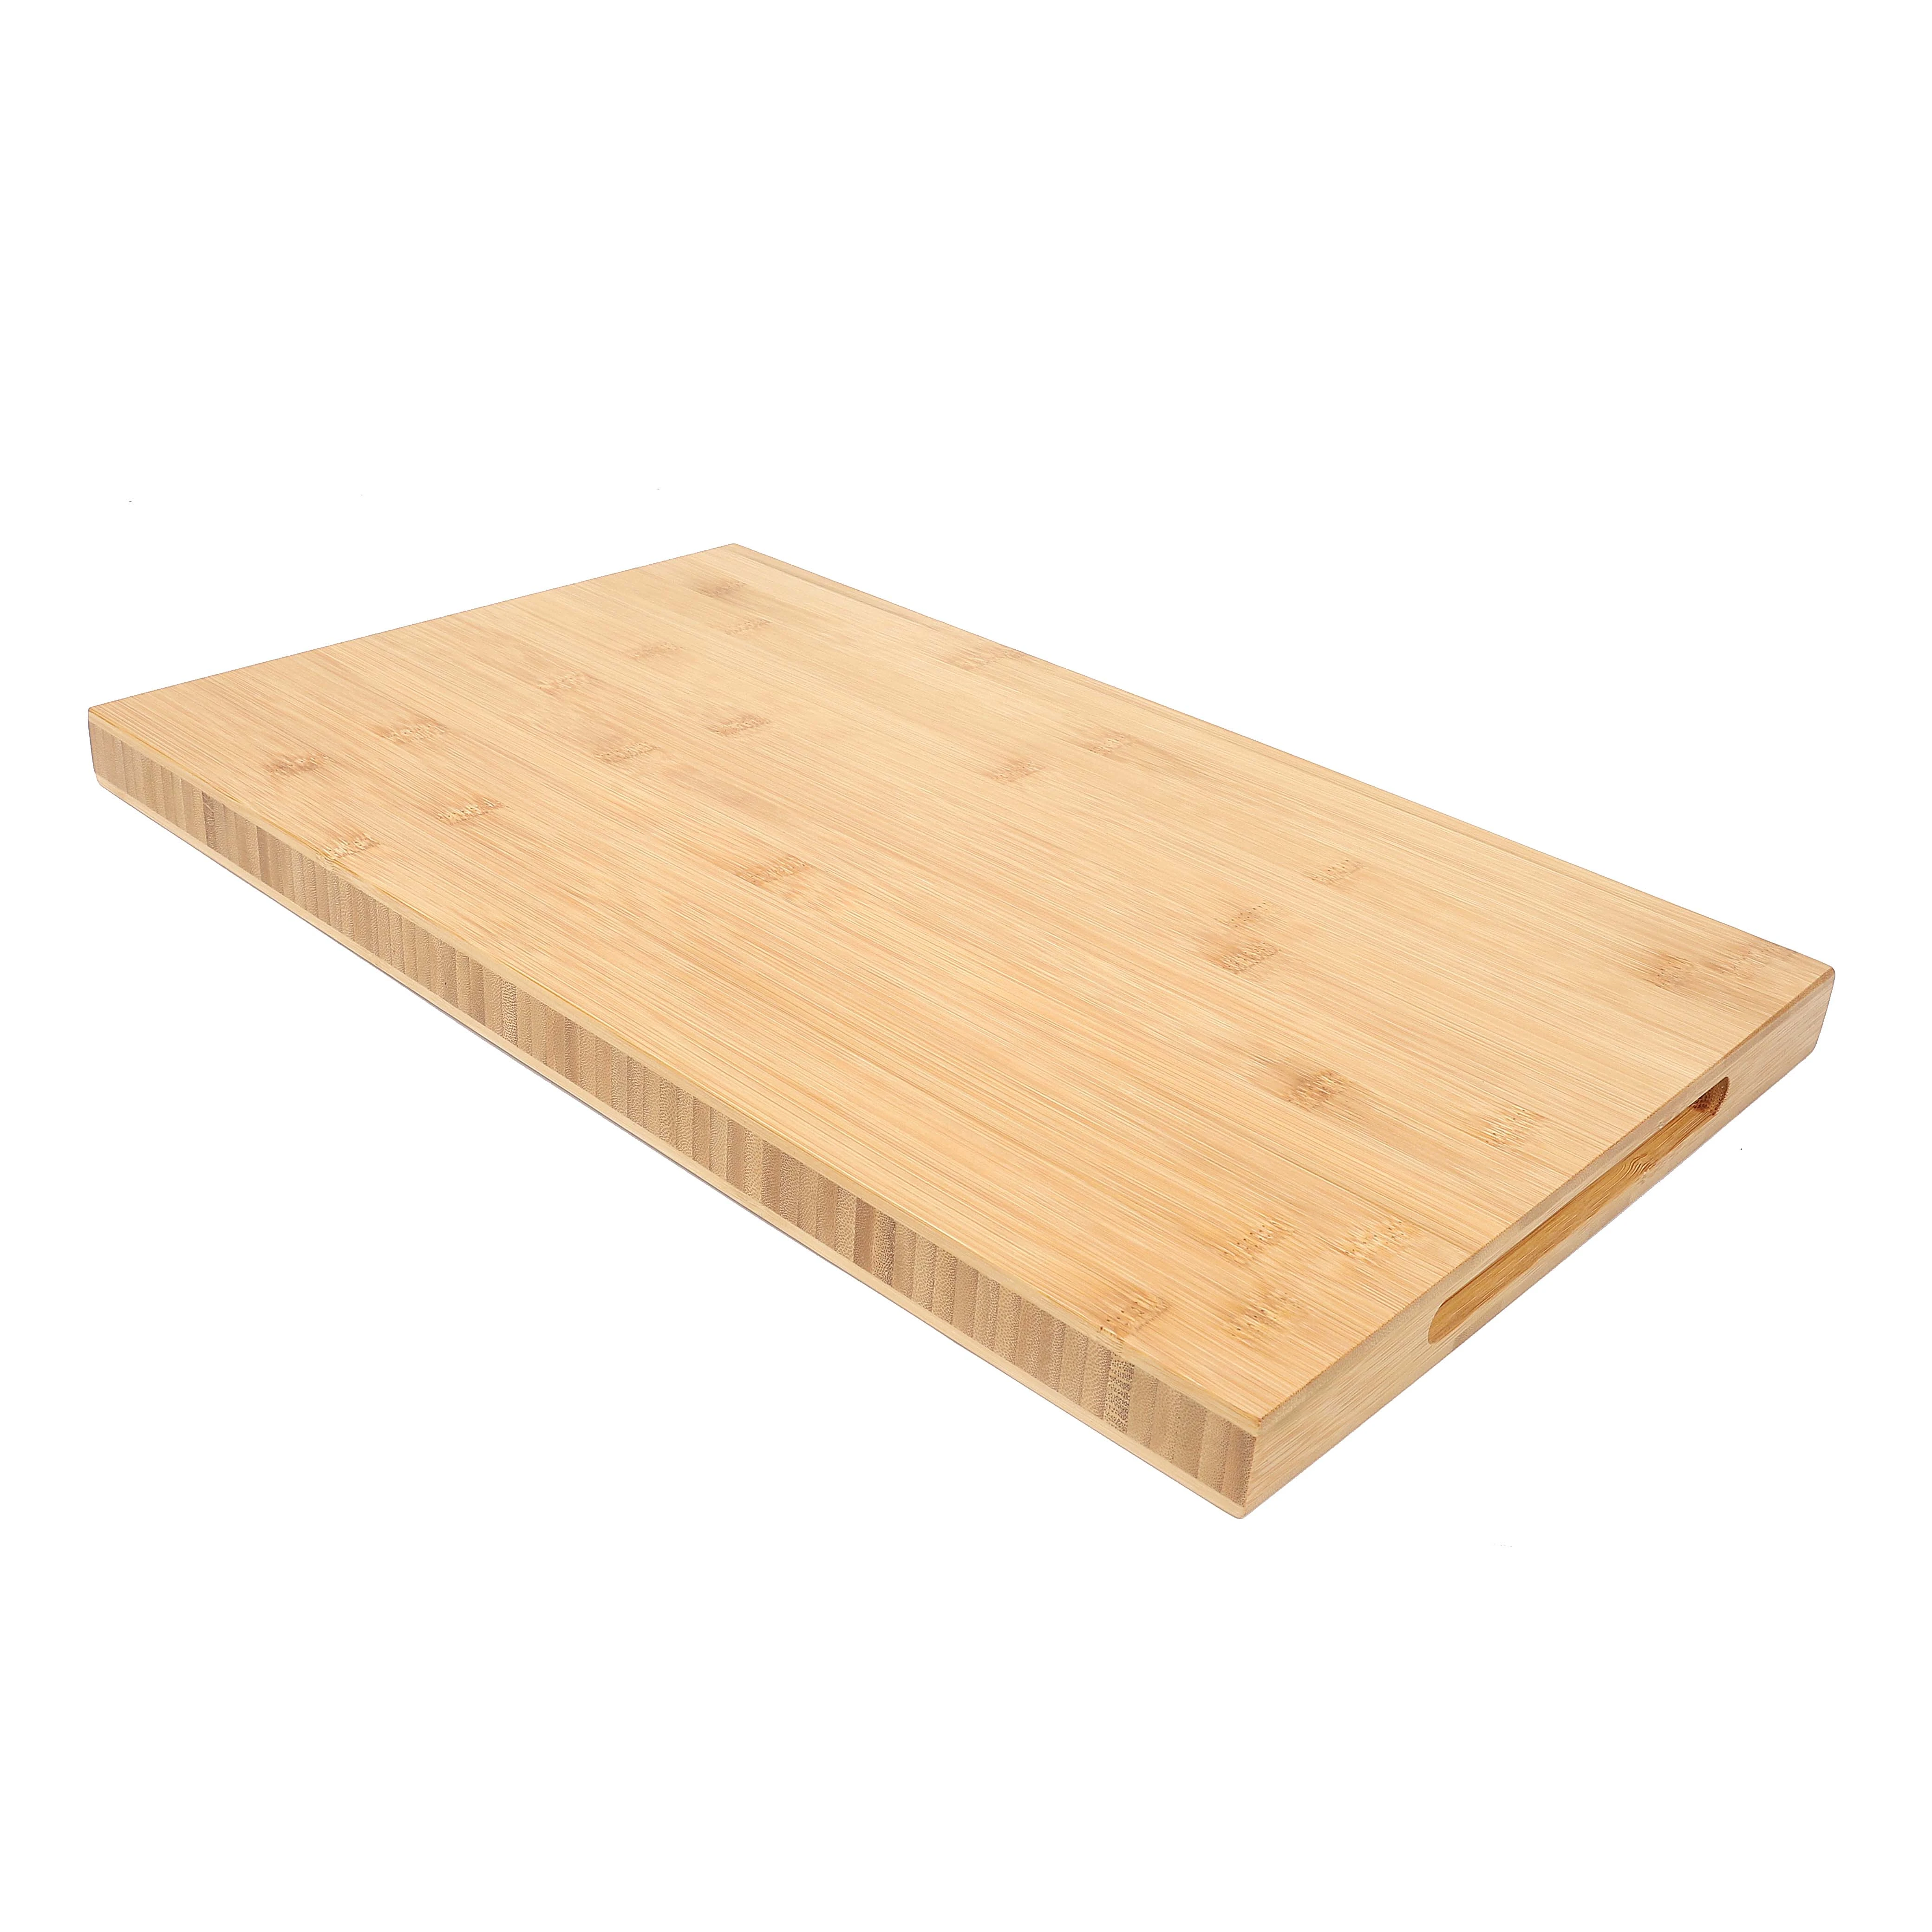 Natural reversible kitchen bamboo wood cutting board chopping block cheese board with handles